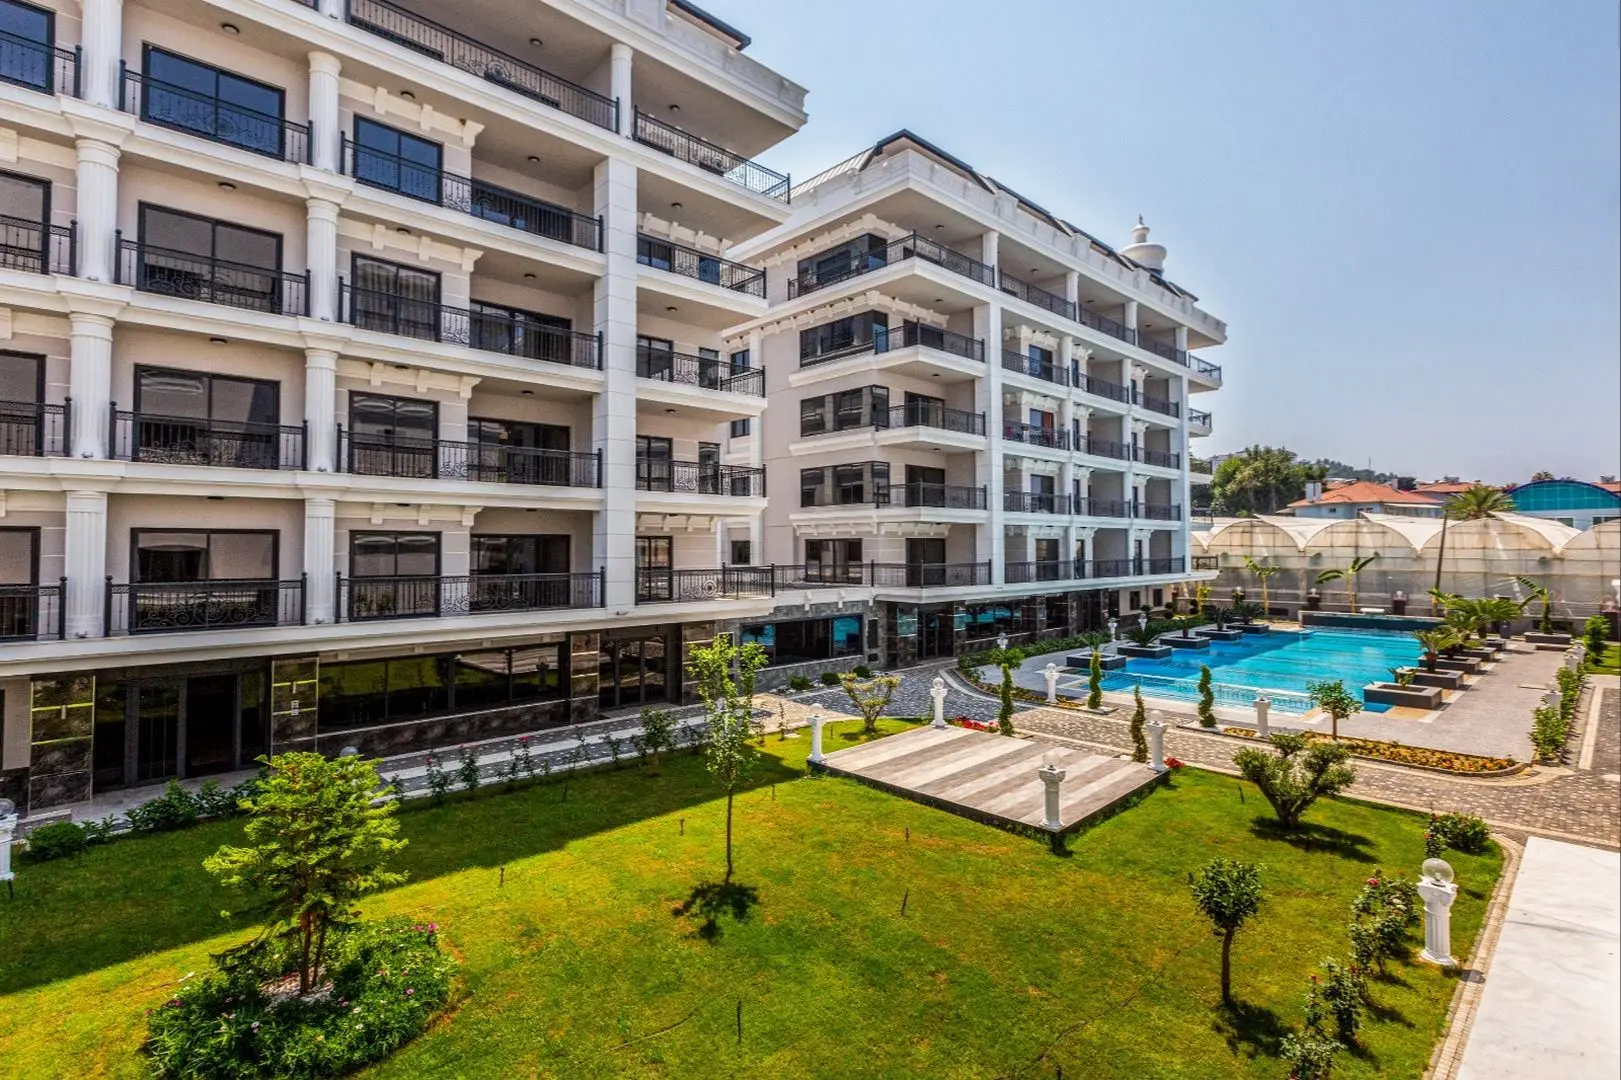 LUXURIOUS 2+1 FLAT IN KARGICAK, ONLY 70 M AWAY FROM THE SEA